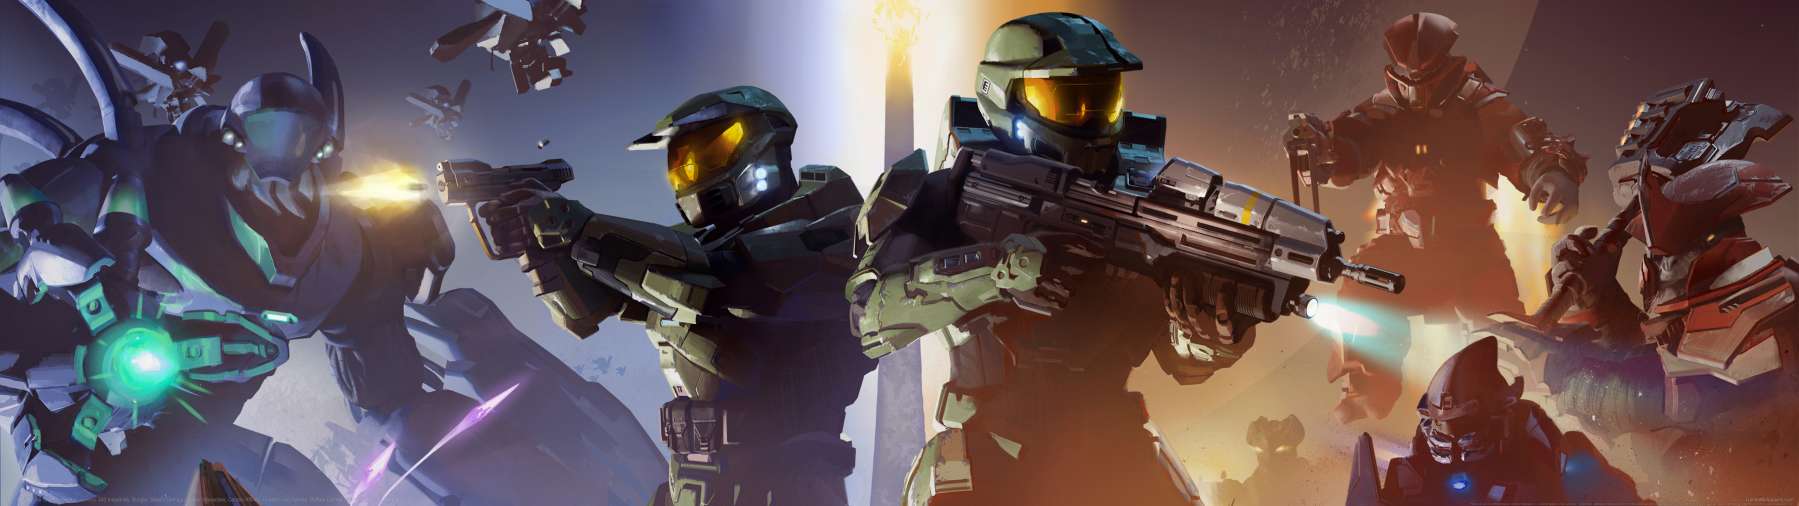 Halo: The Master Chief Collection superwide wallpaper or background 03